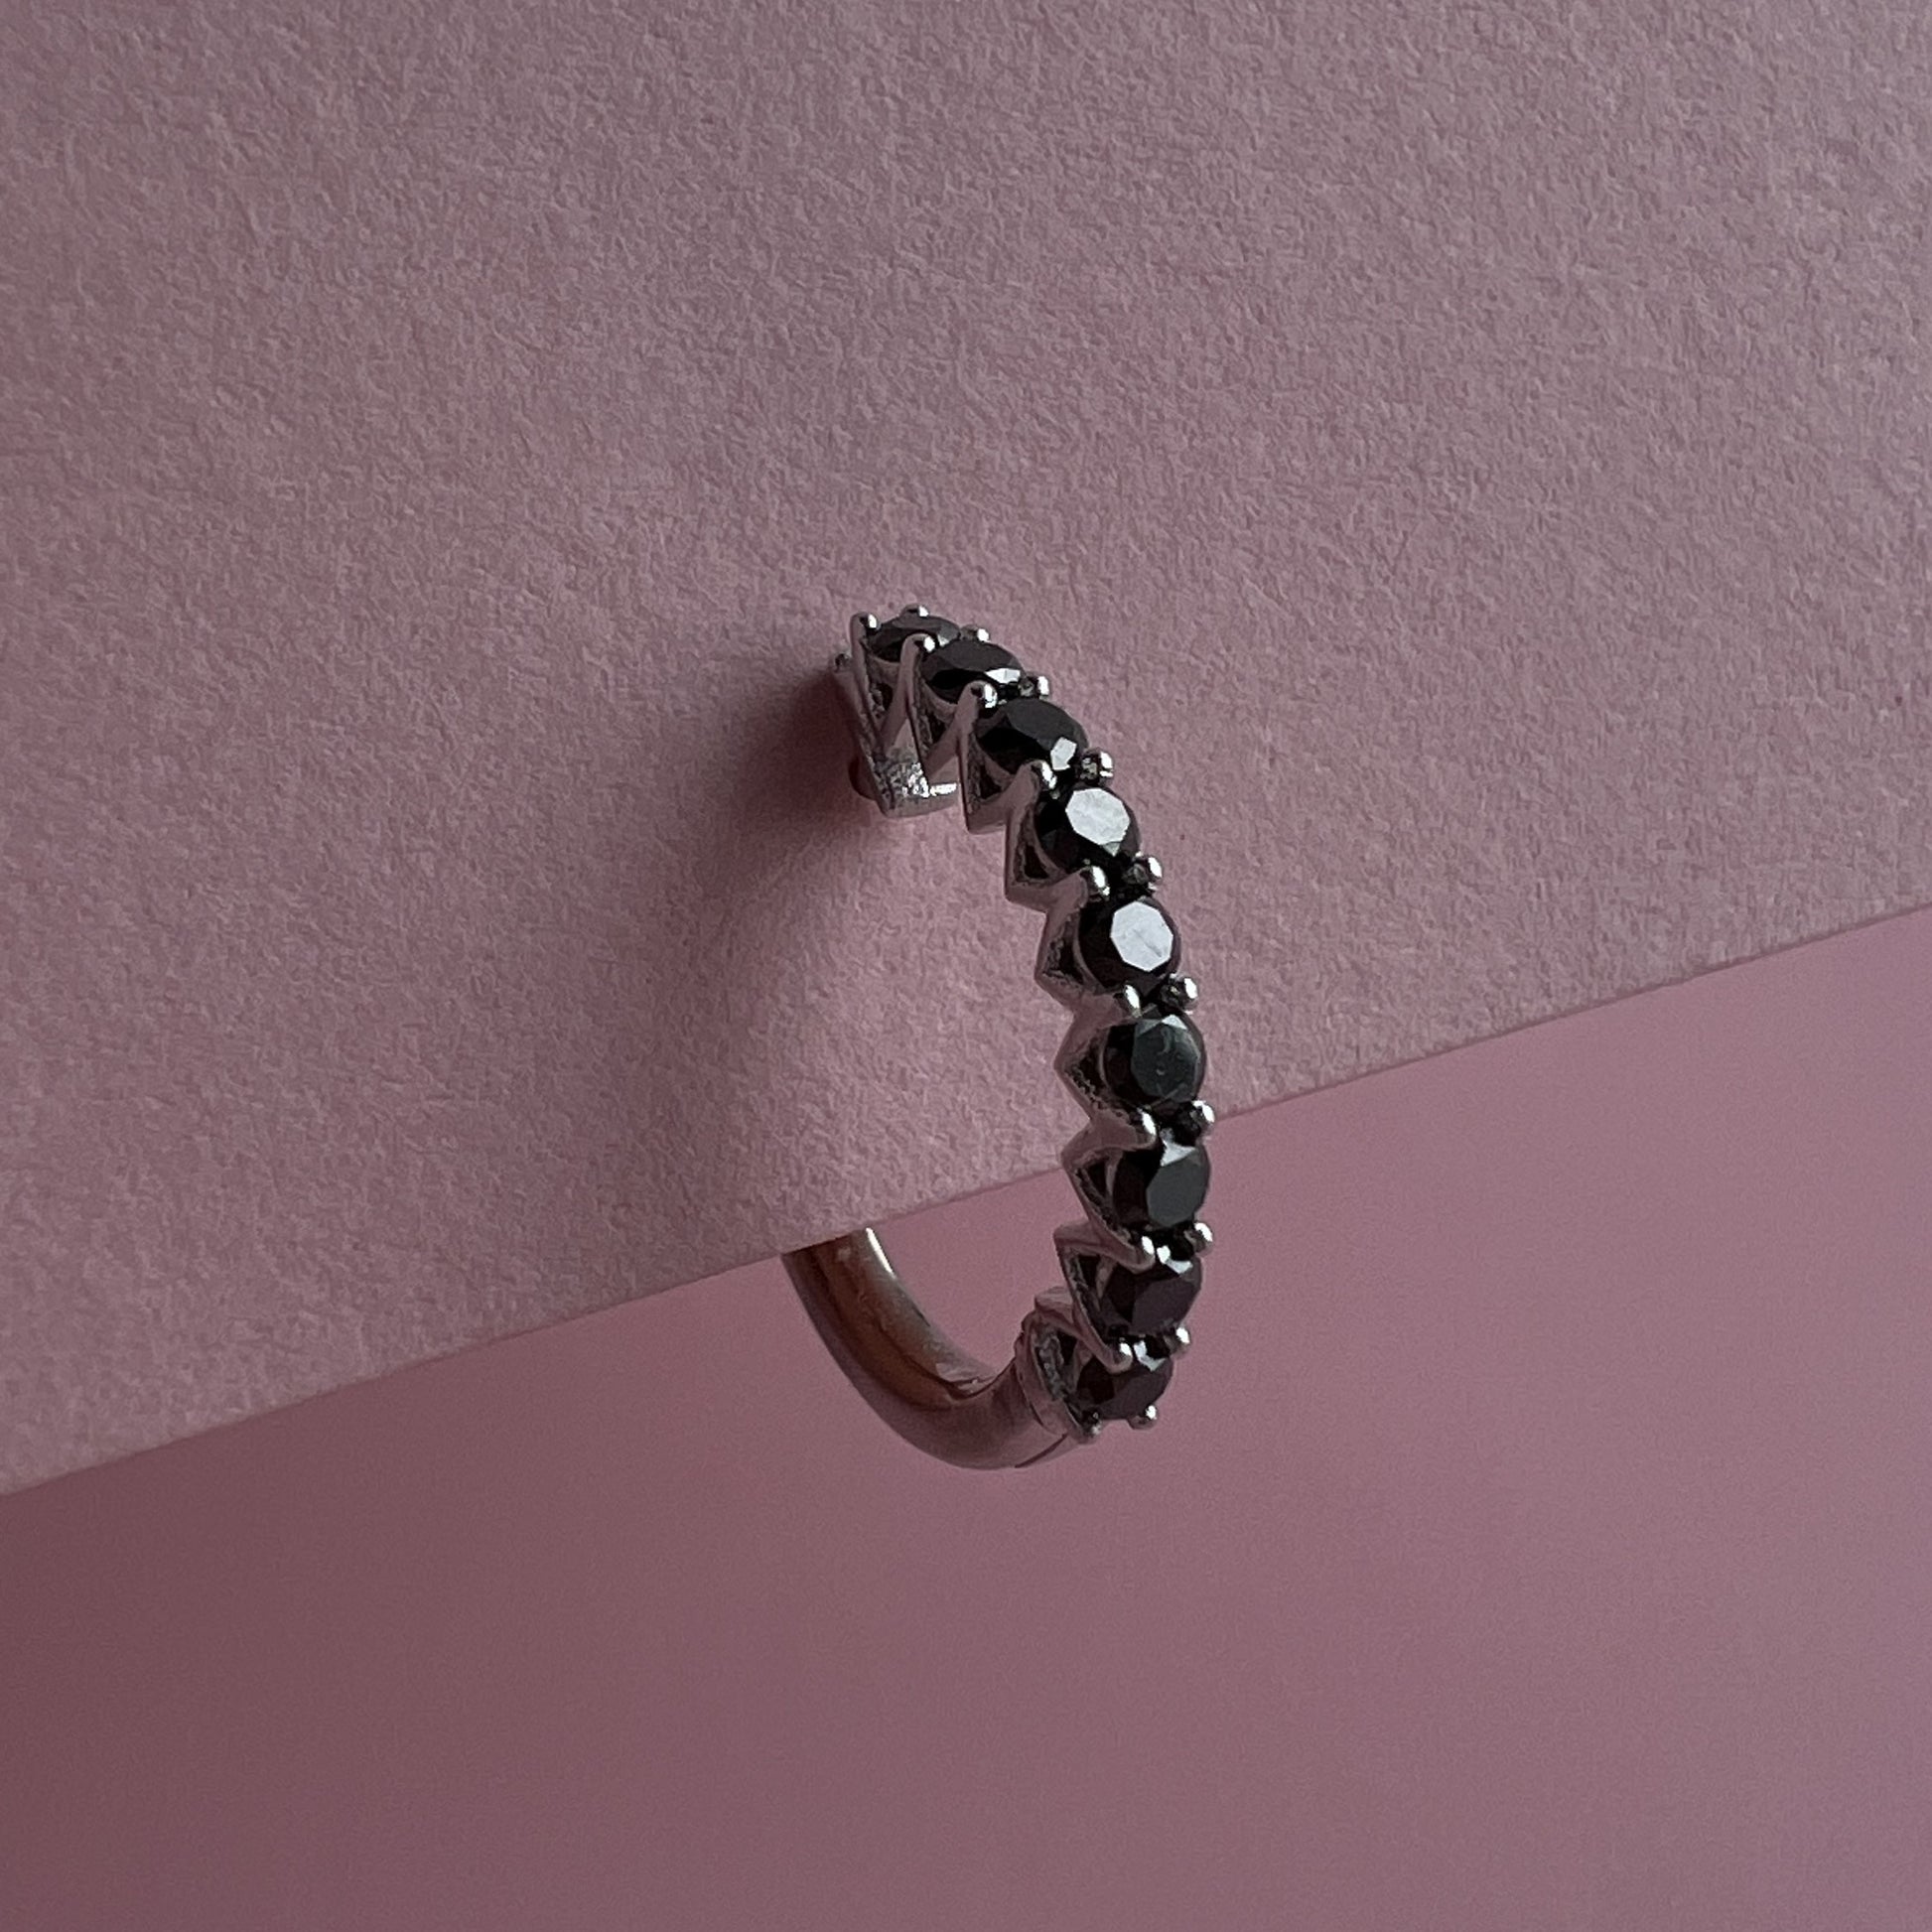 HOOP EARRING "ARCHES" WITH BLACK DIAMONDS / SOLID GOLD